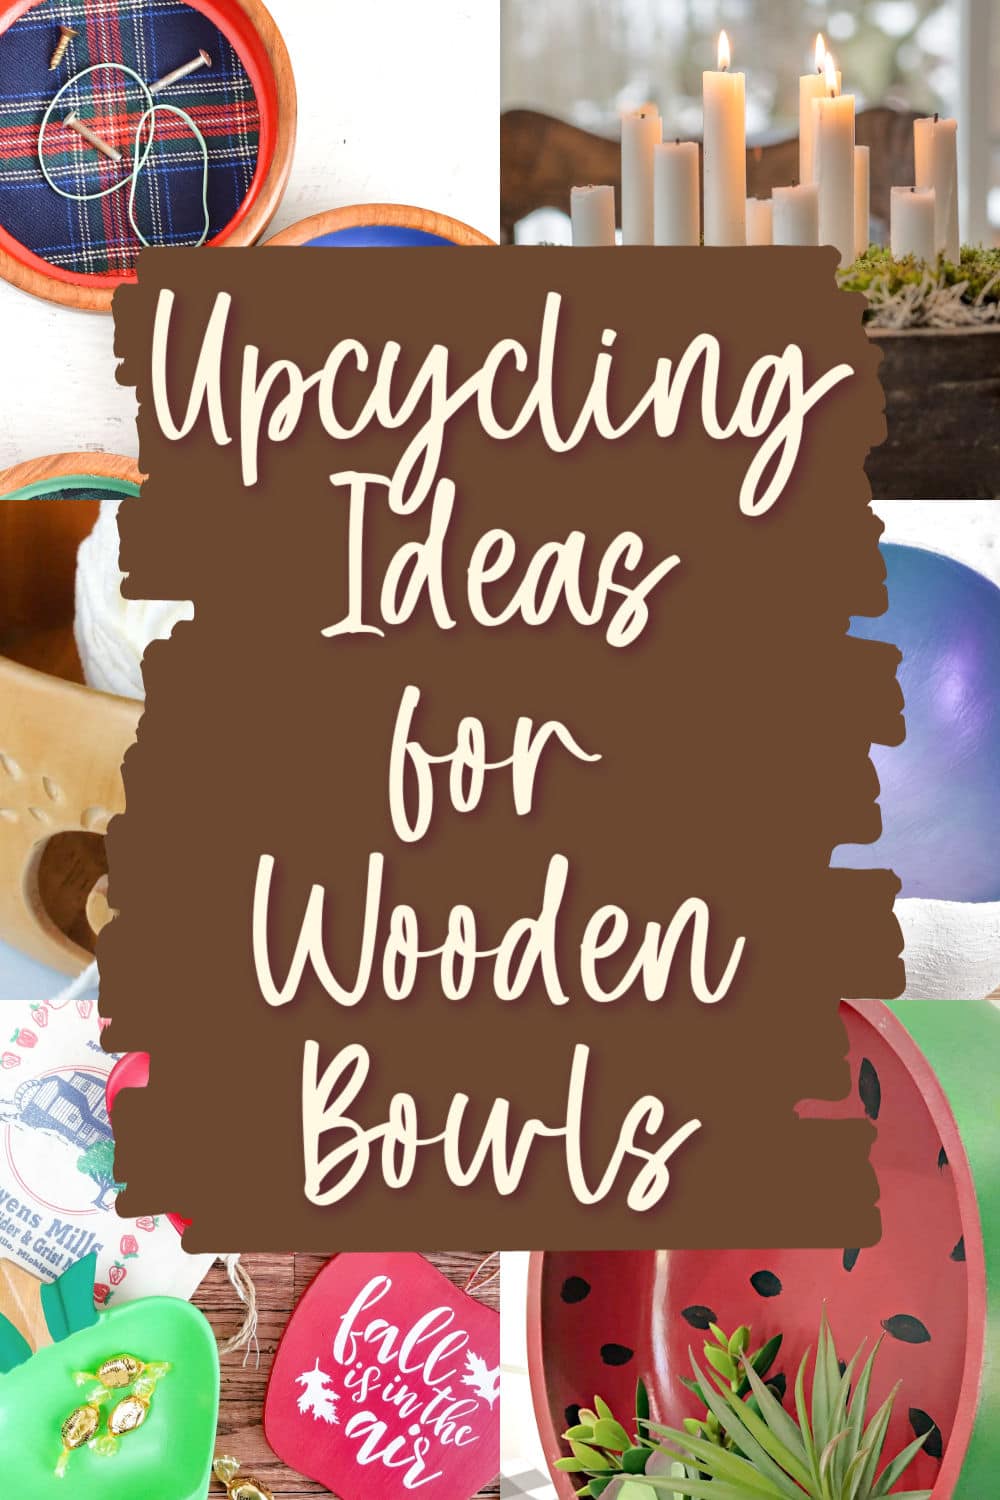 repurposing projects and ideas for wooden bowls